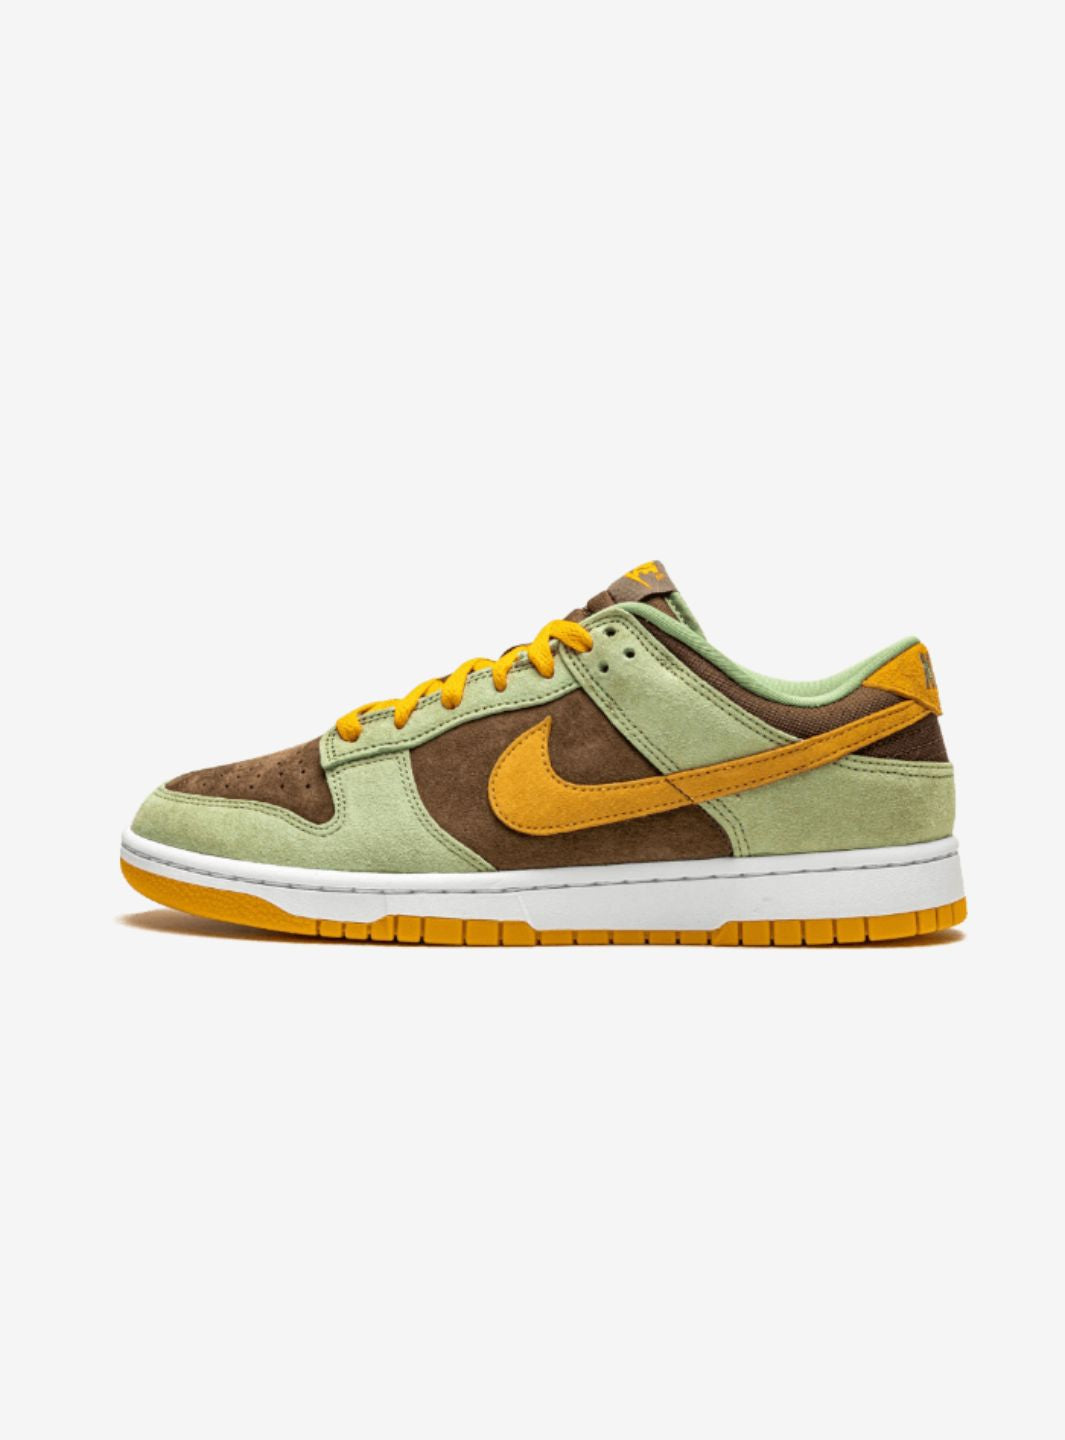 Nike Dunk Low Dusty Olive - DH5360-300 | ResellZone